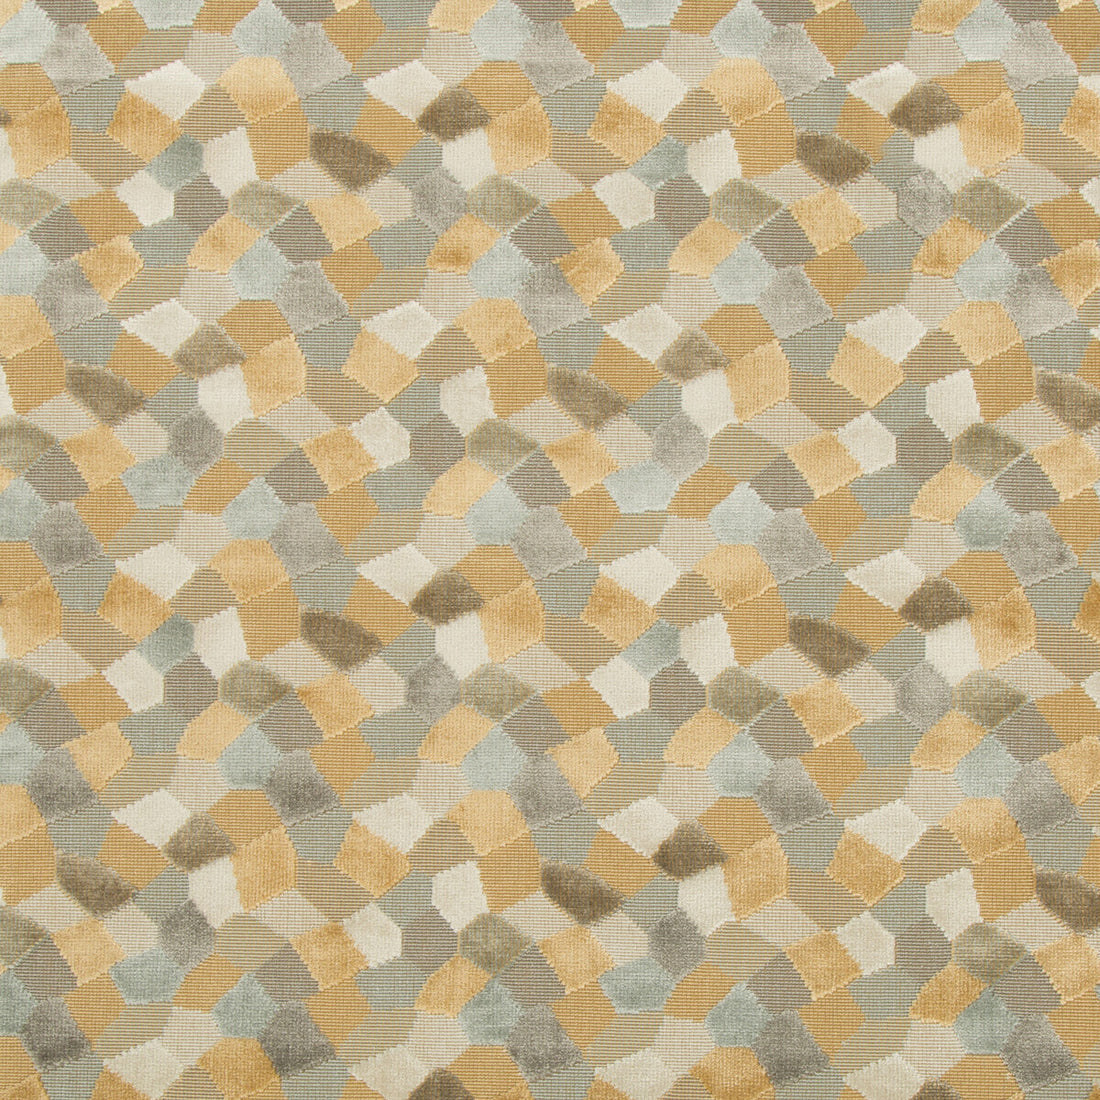 Modern Mosaic fabric in tuscan sun color - pattern 34783.416.0 - by Kravet Couture in the Artisan Velvets collection